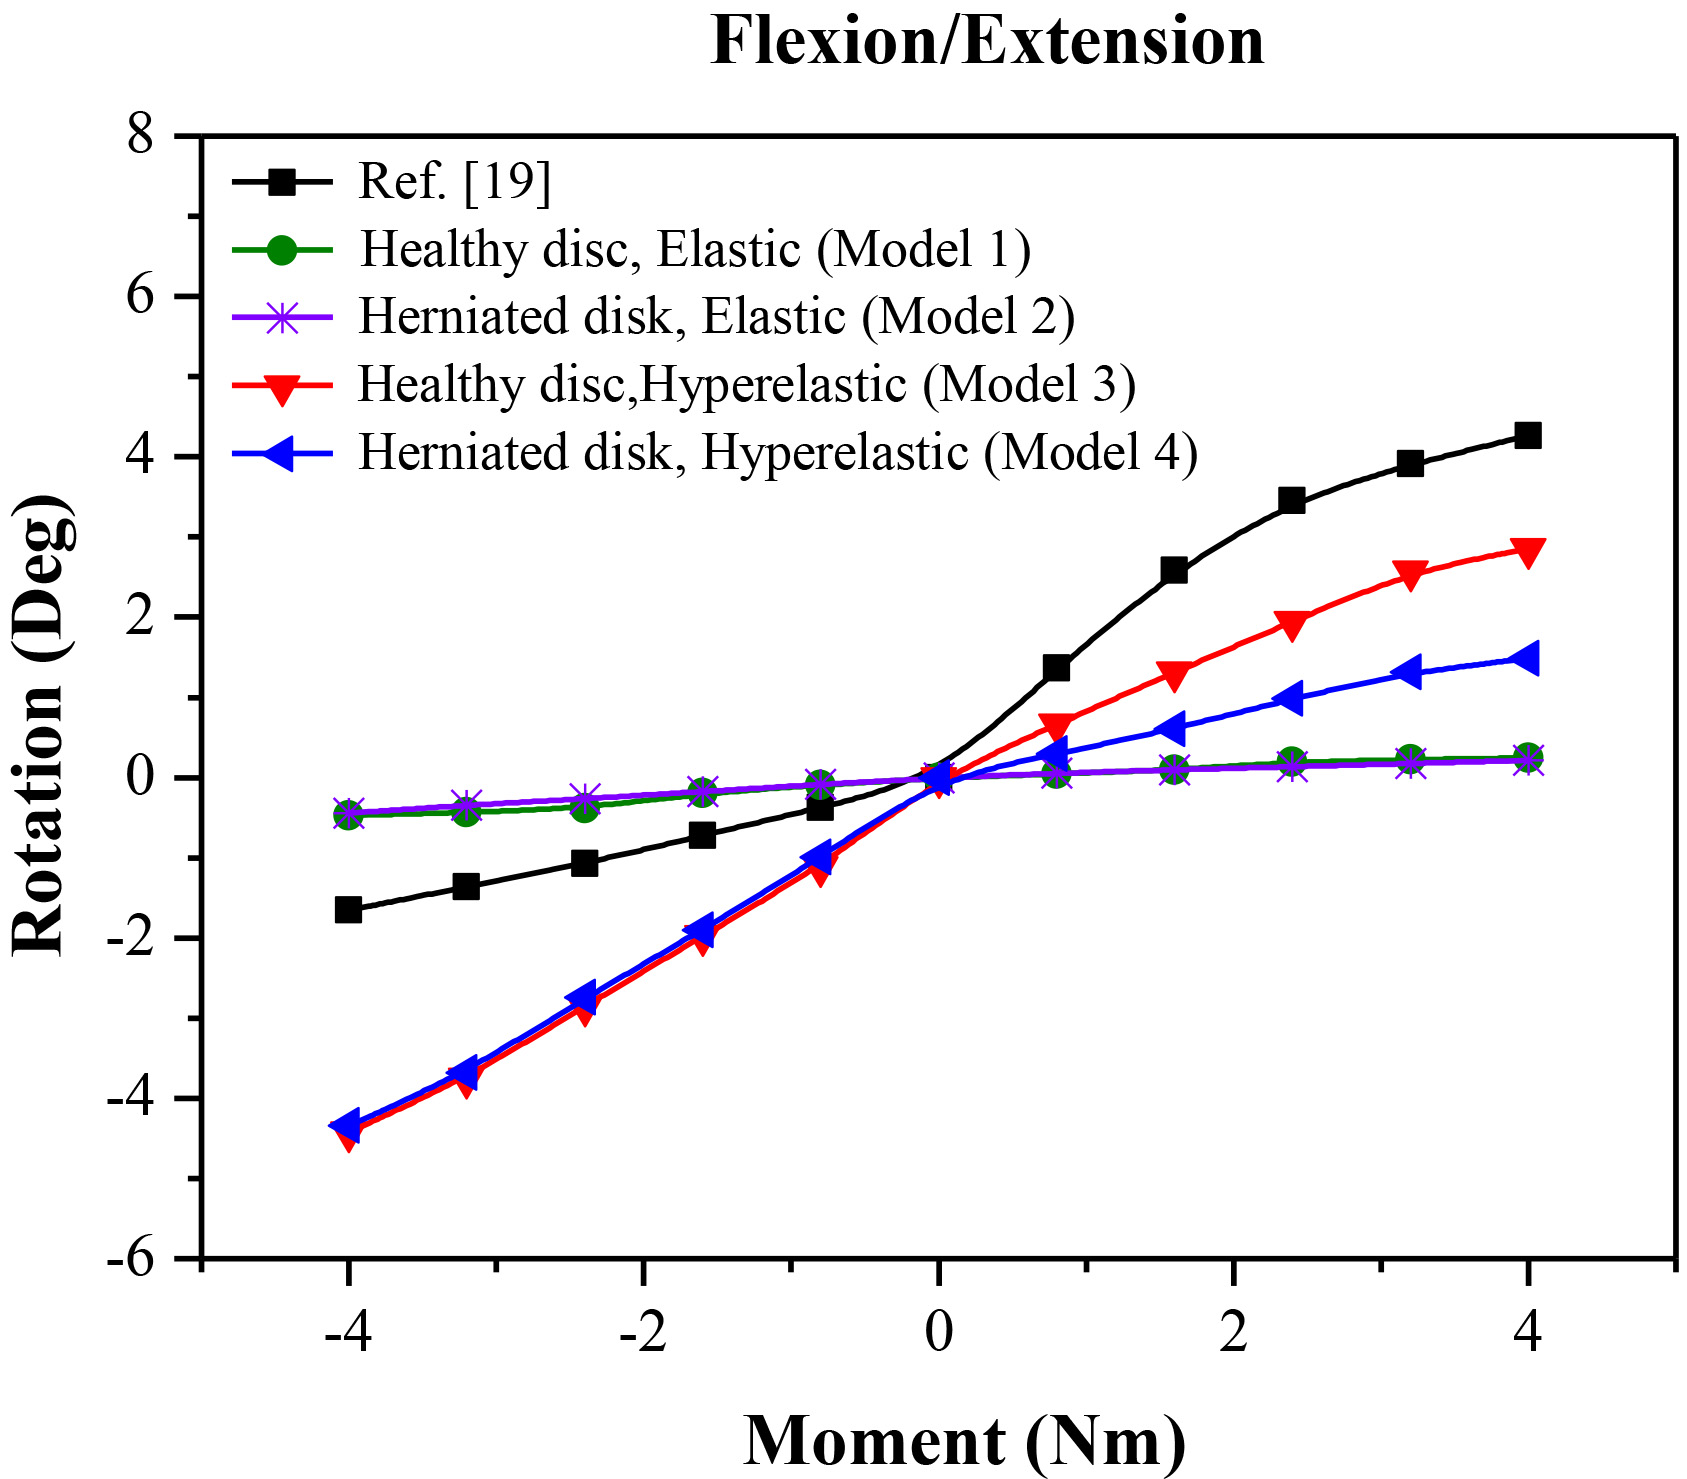 Rotation of Flexion and extension under moments of 0 Nm–4 Nm.